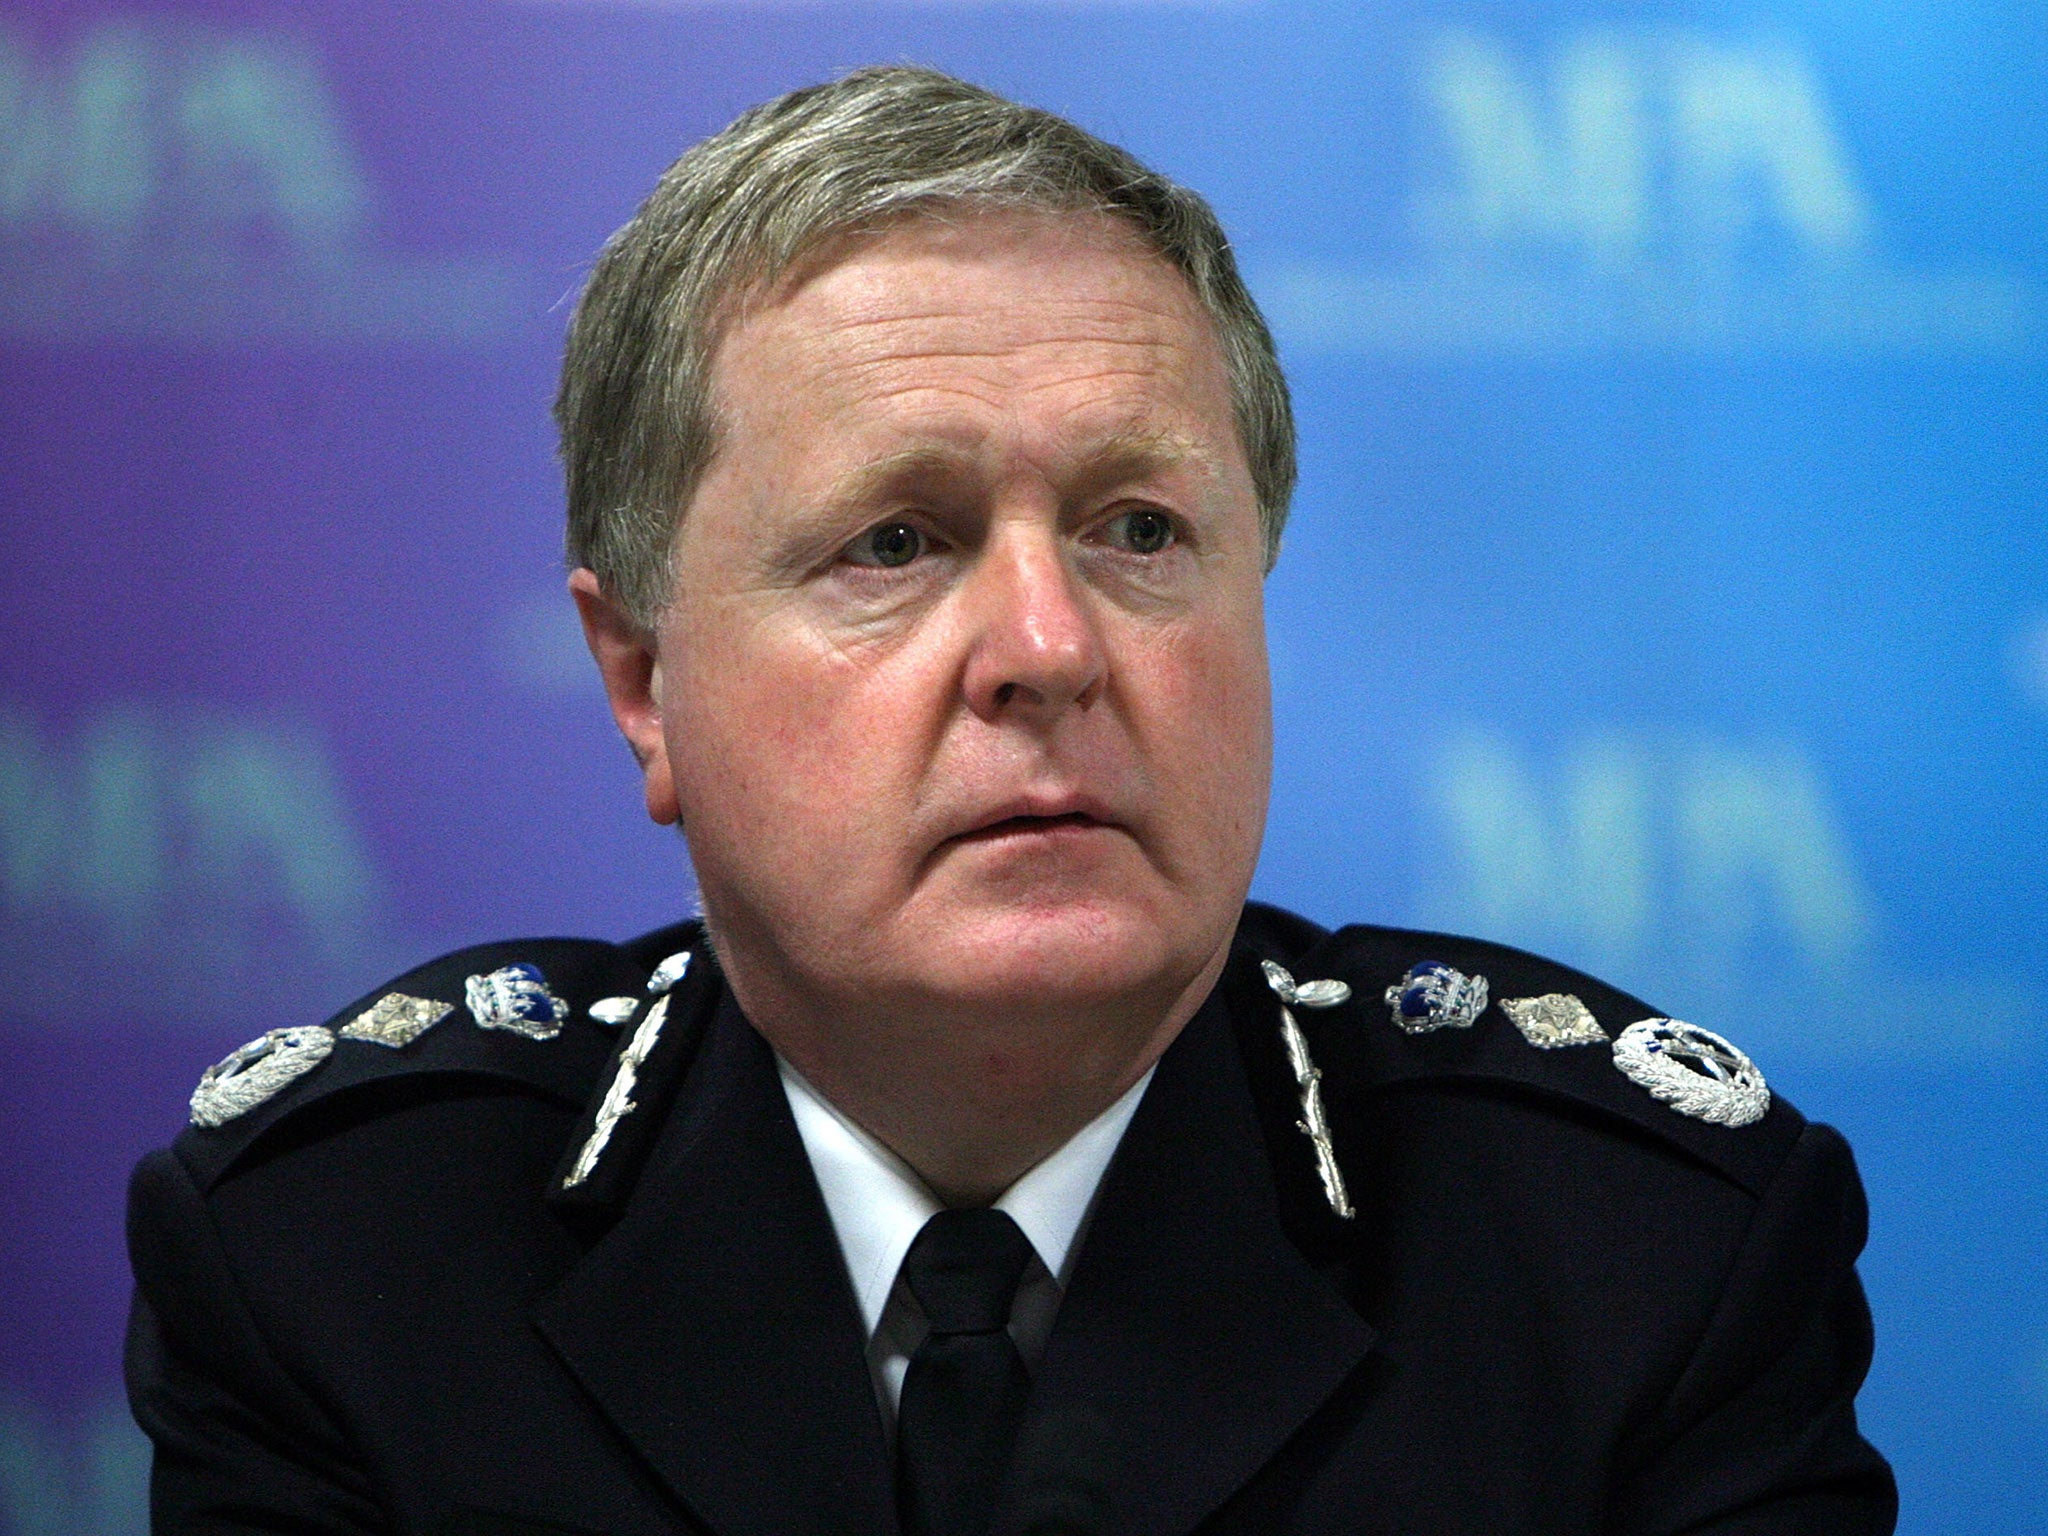 Lord Blair, who was commissioner of the Metropolitan Police at the time of the London bombings in 2005